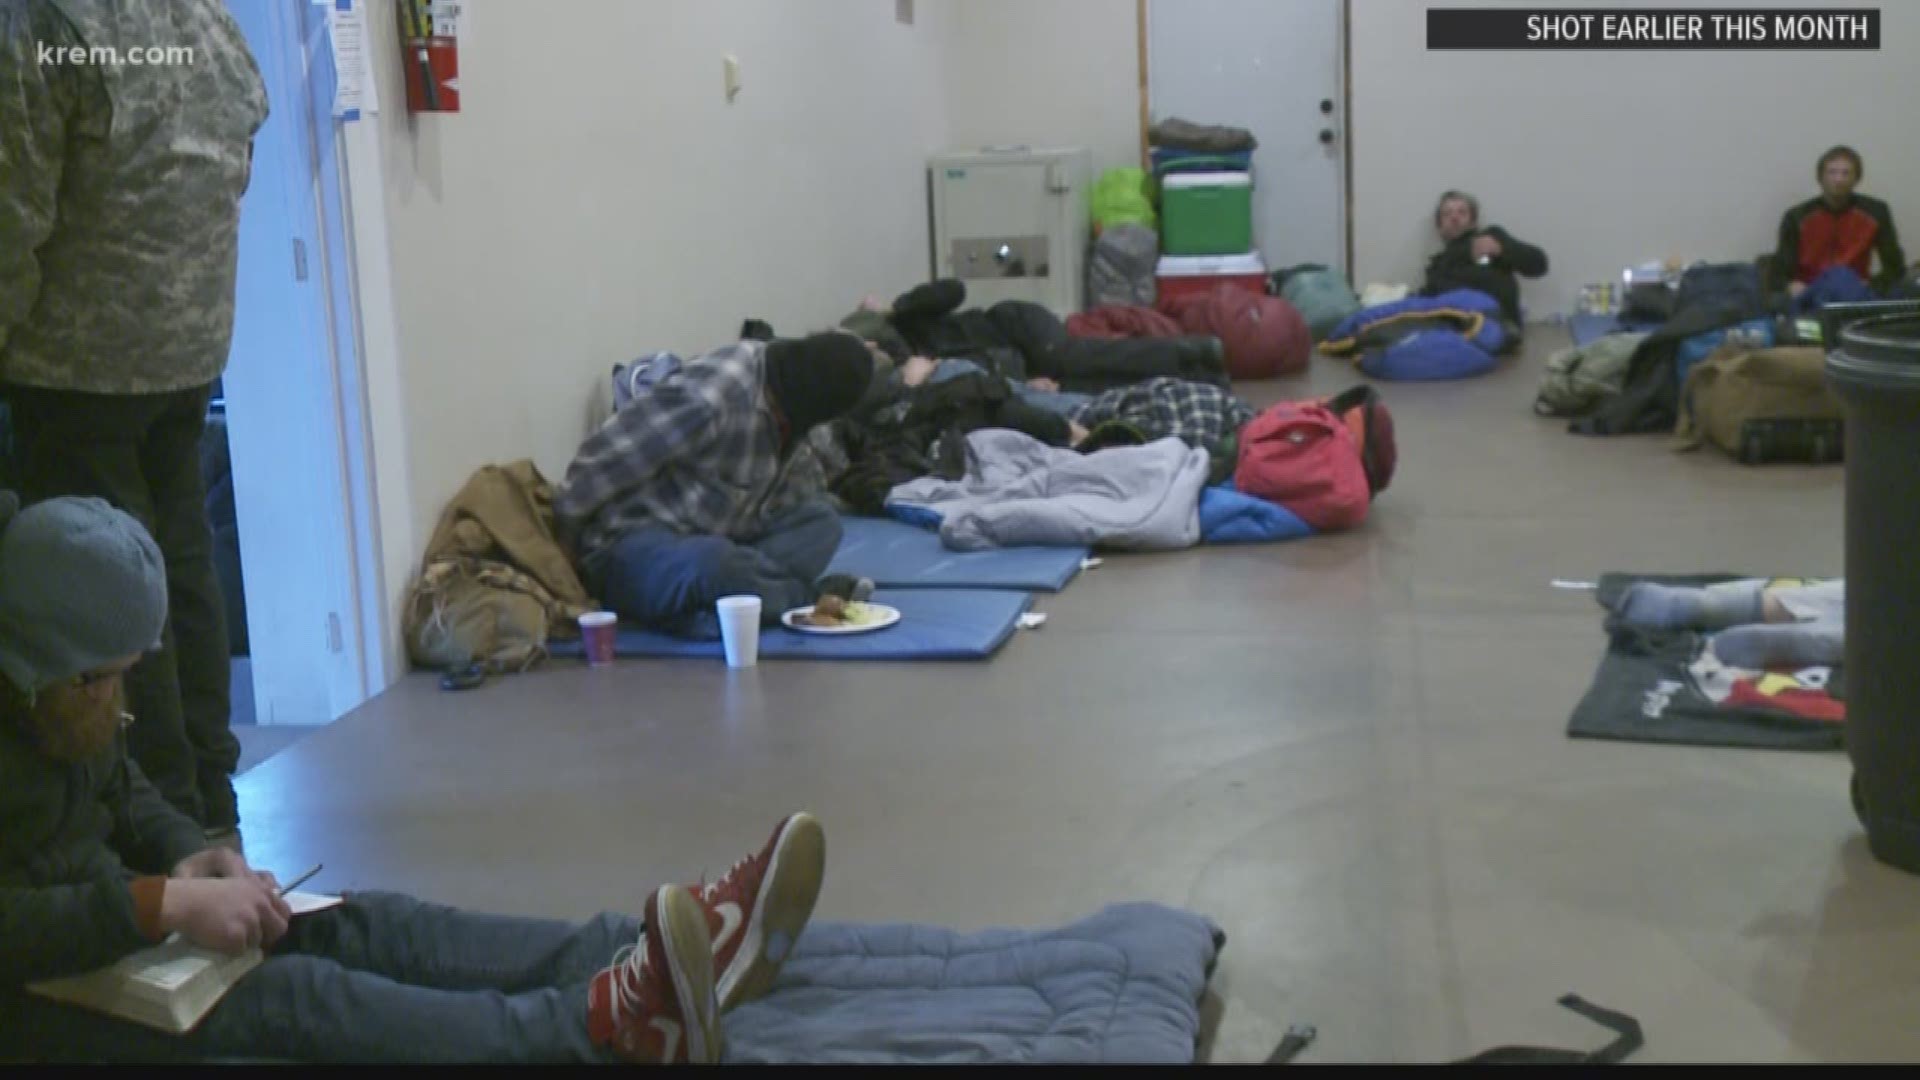 The city's warming centers for homeless Spokane residents have become all the more important during a record-breaking February of snow and cold.